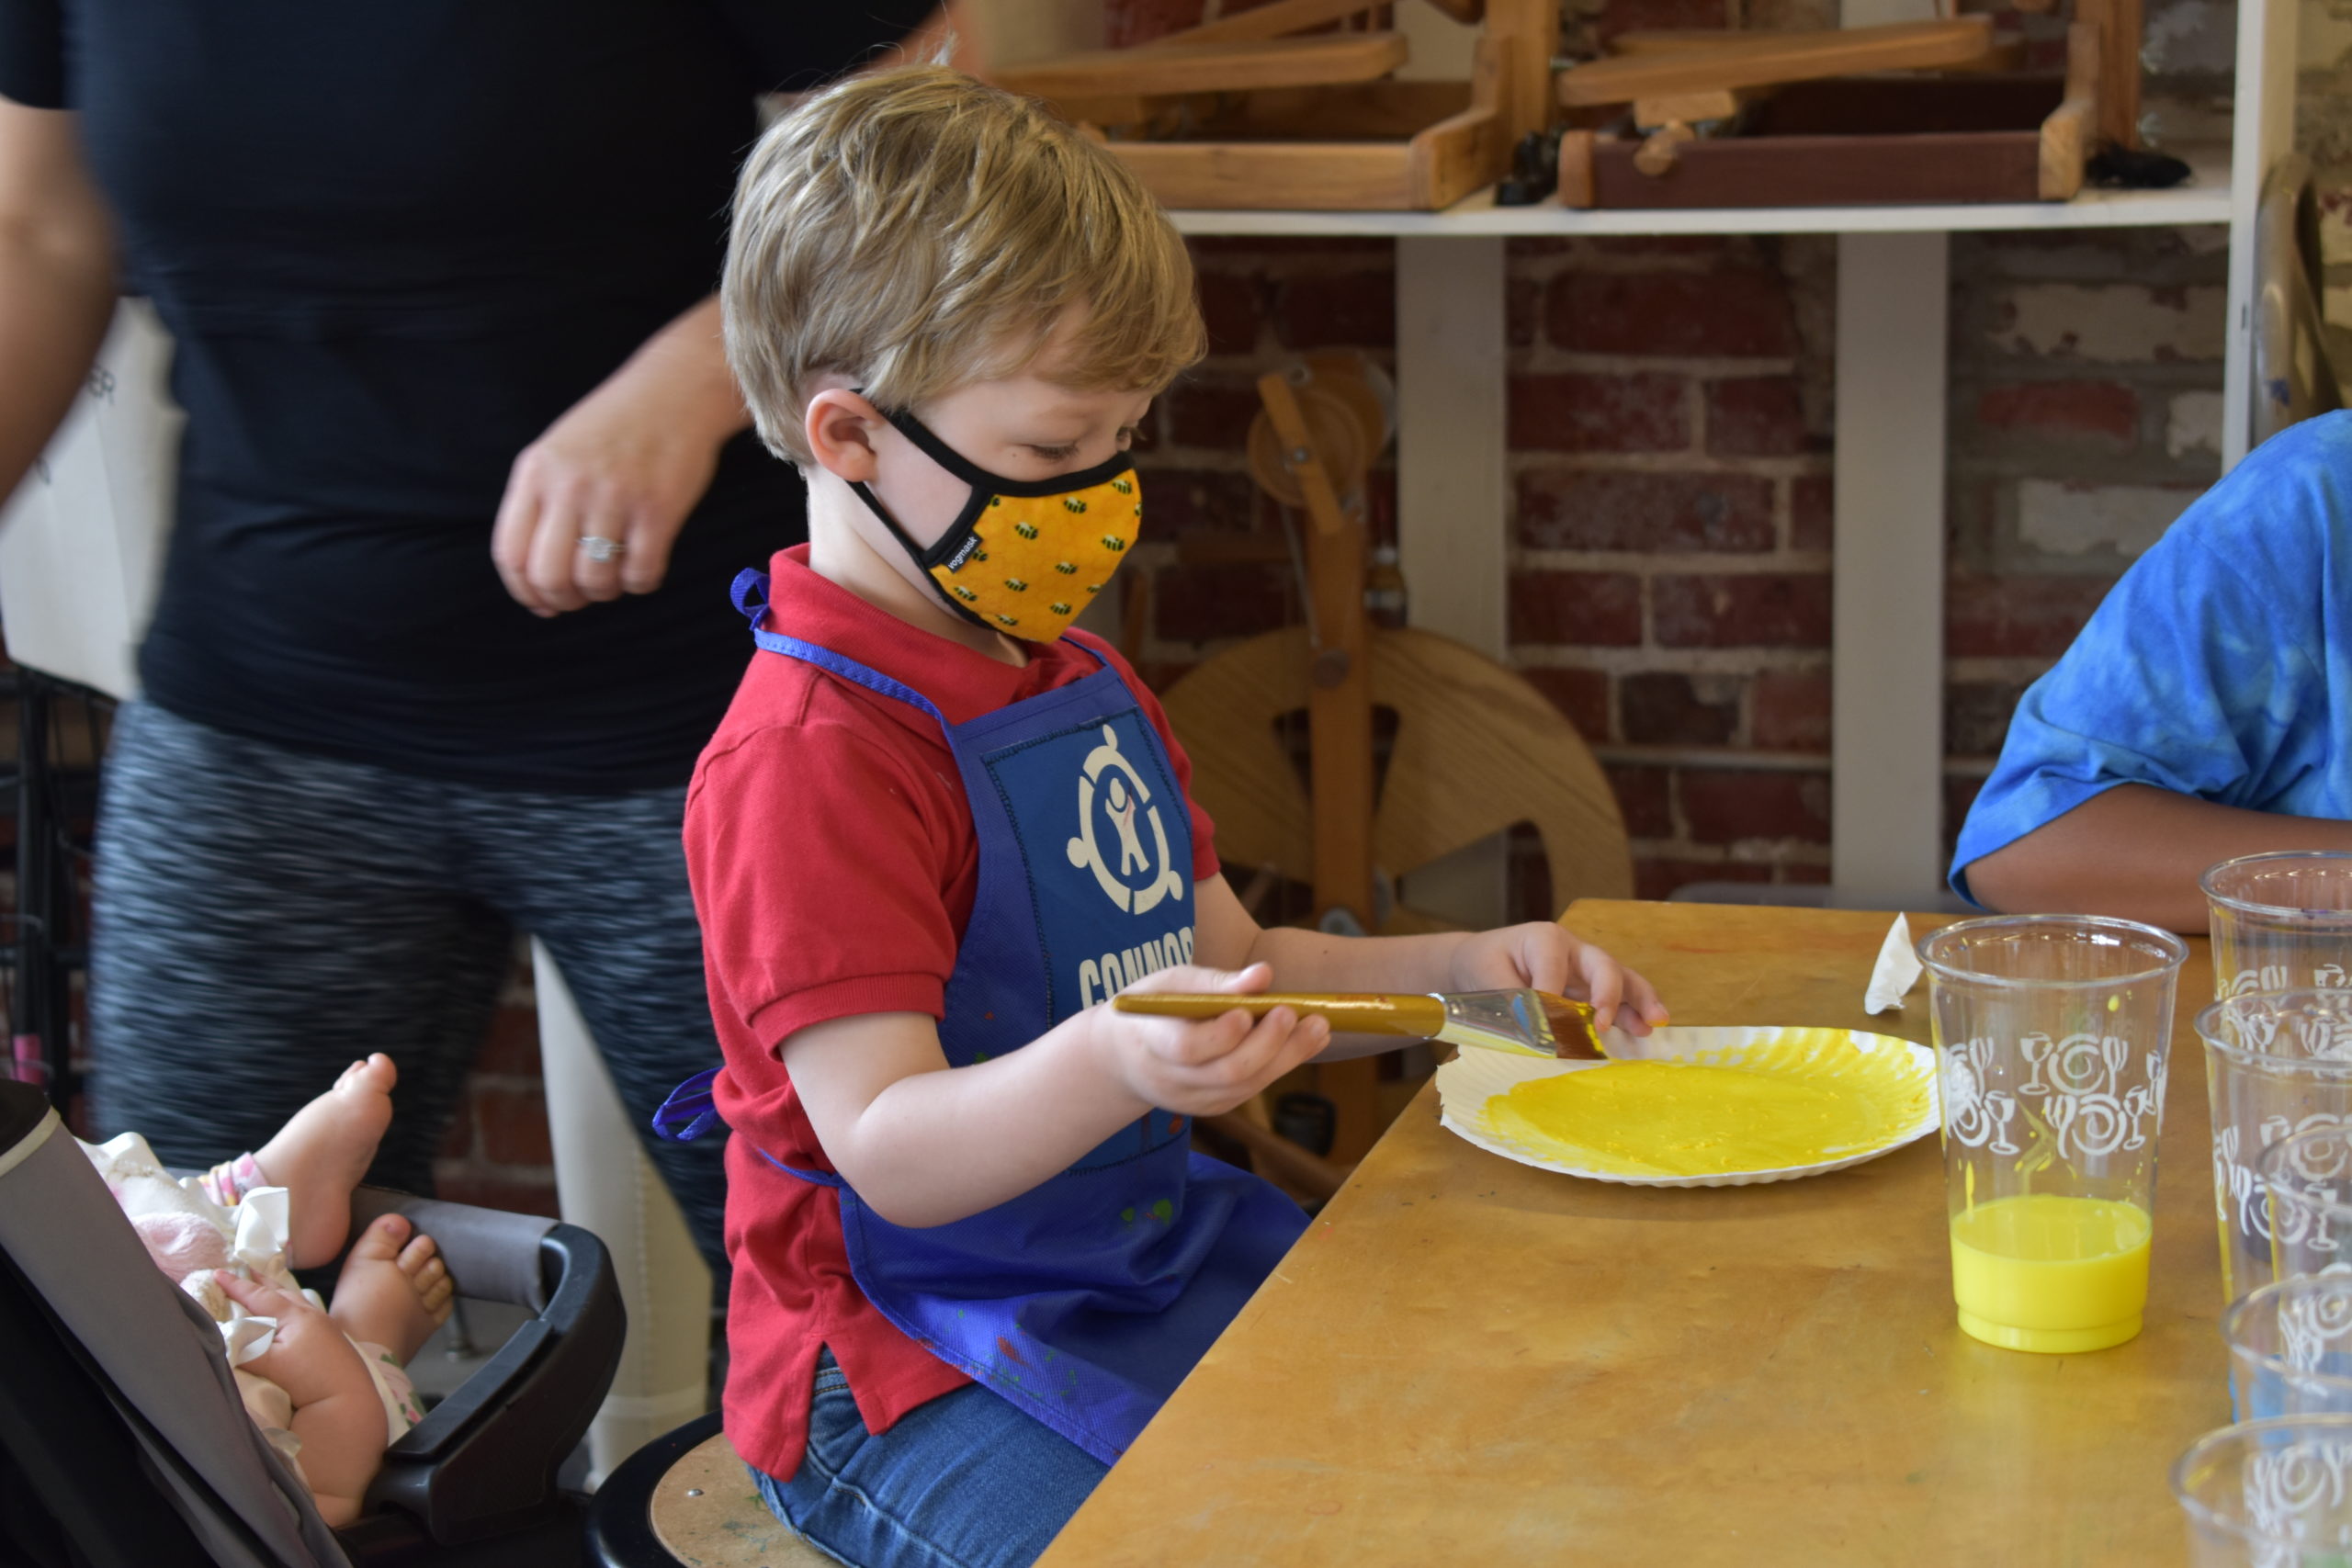 A child wearing a mask sitting at a table painting a paper plate yellow